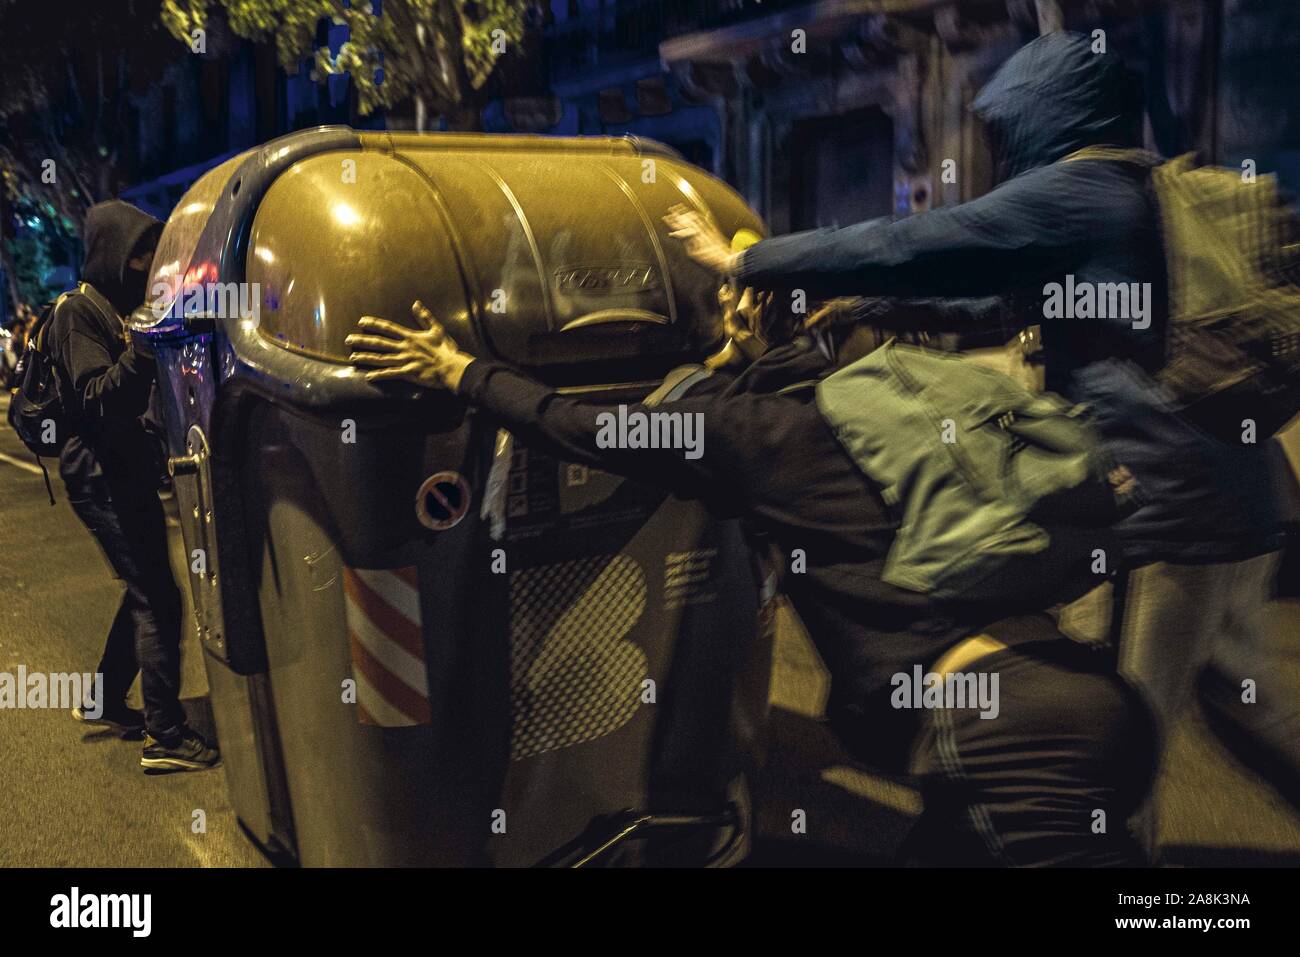 Barcelona, Spain. 9 November, 2019:  Members of Barcelona's CDR (Committee for the Defense of the Republic) build barricades moving garbage containers protesting the Supreme Court's verdict against 9 Catalan leaders over their role in a banned referendum on secession in October 2017 as an act of civil disobedience against the central electoral commission during election silence the day before a general election. Stock Photo